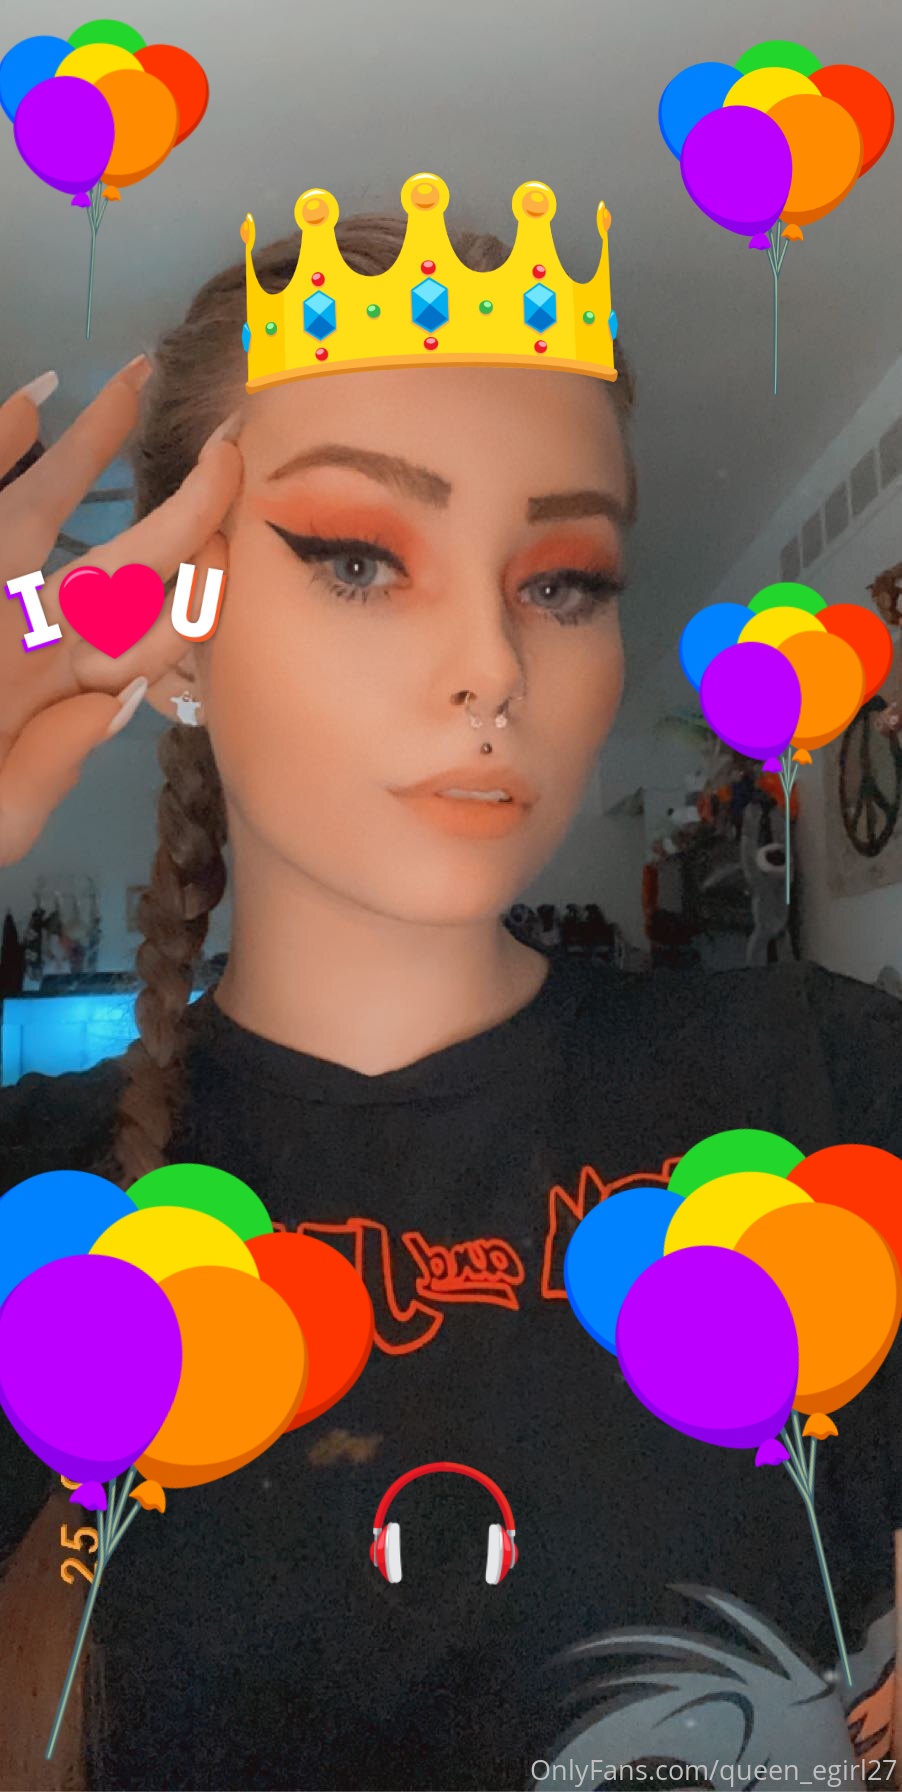 Queen Egirl any on X: My birthday I am happy my pussy and ass very nice  iam really horny 💝💝💝🌹🌹🌹❣️❣️❣️💋💋💋 Monday 12pm  t.coRtp8mG8bJn  X